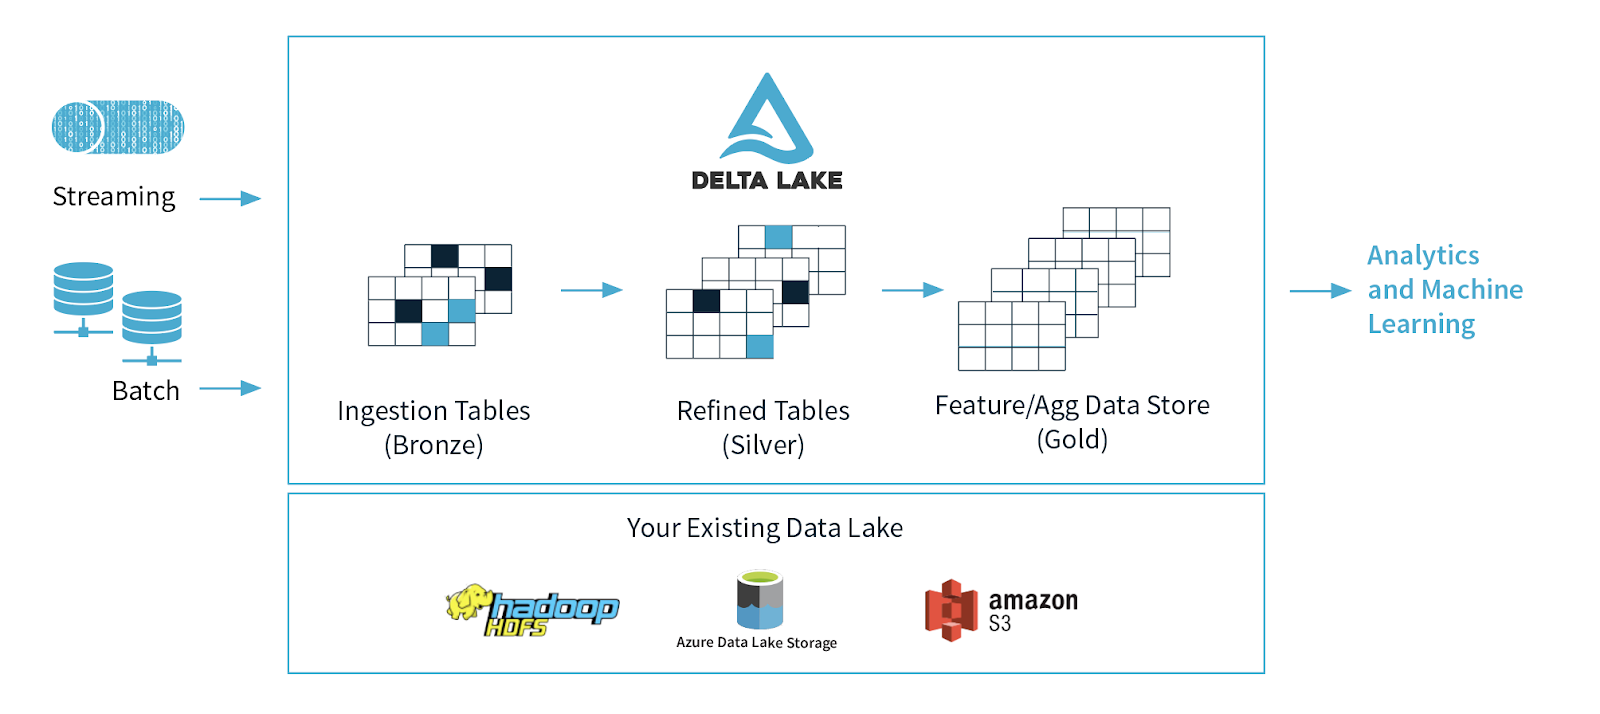 In Delta Lake 1.0, multiple Delta Lake clusters can read and write from the same table.